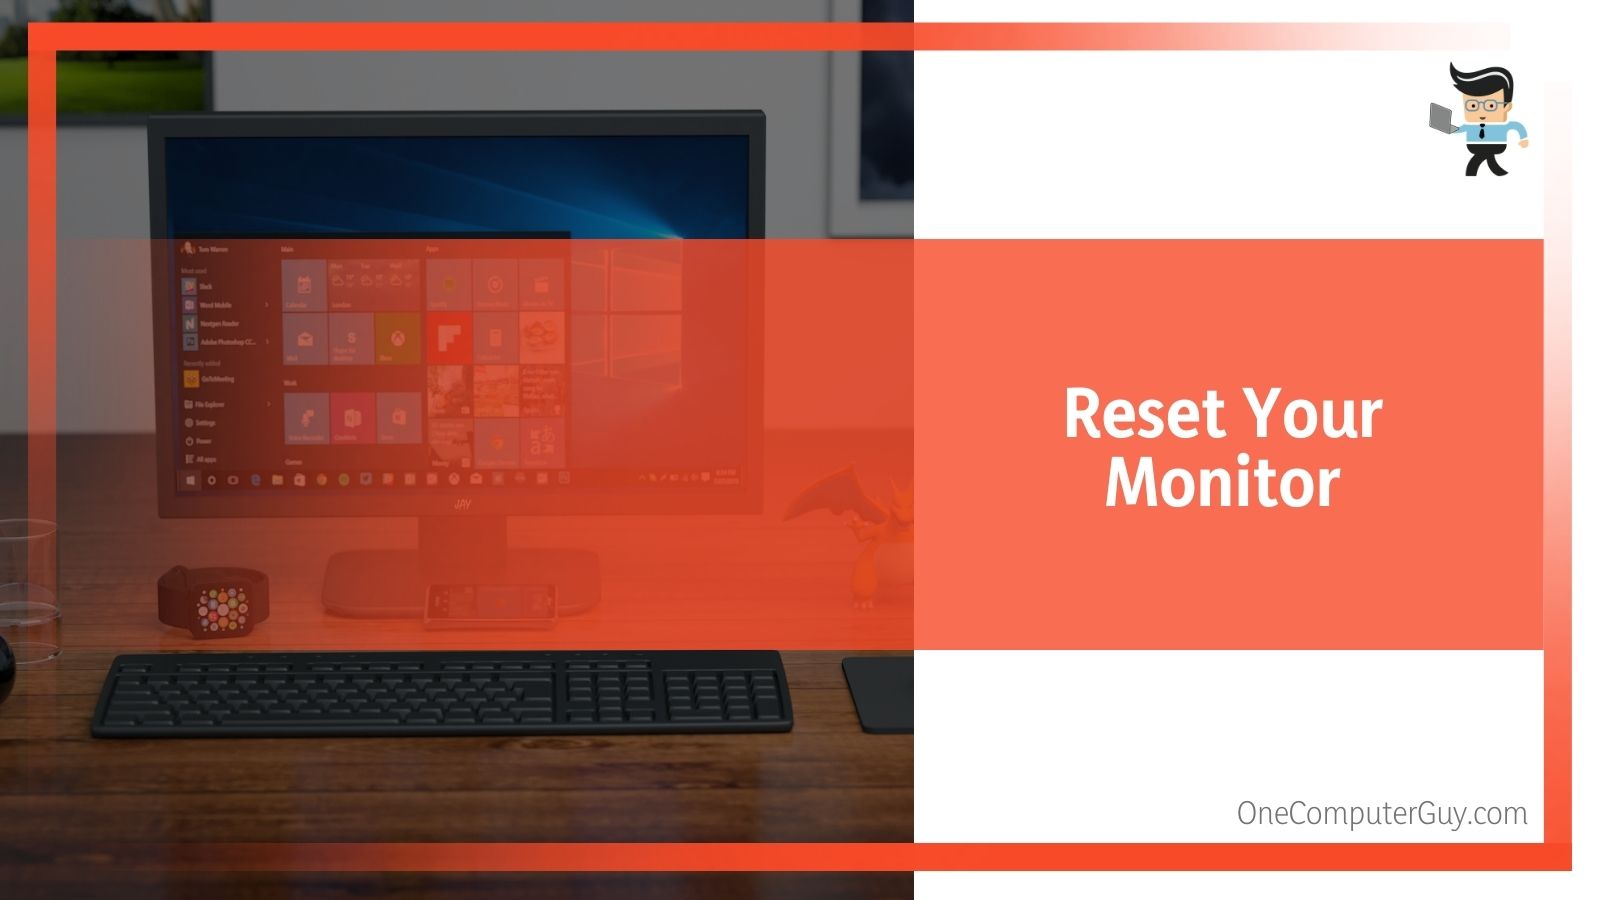 Reset Your Monitor